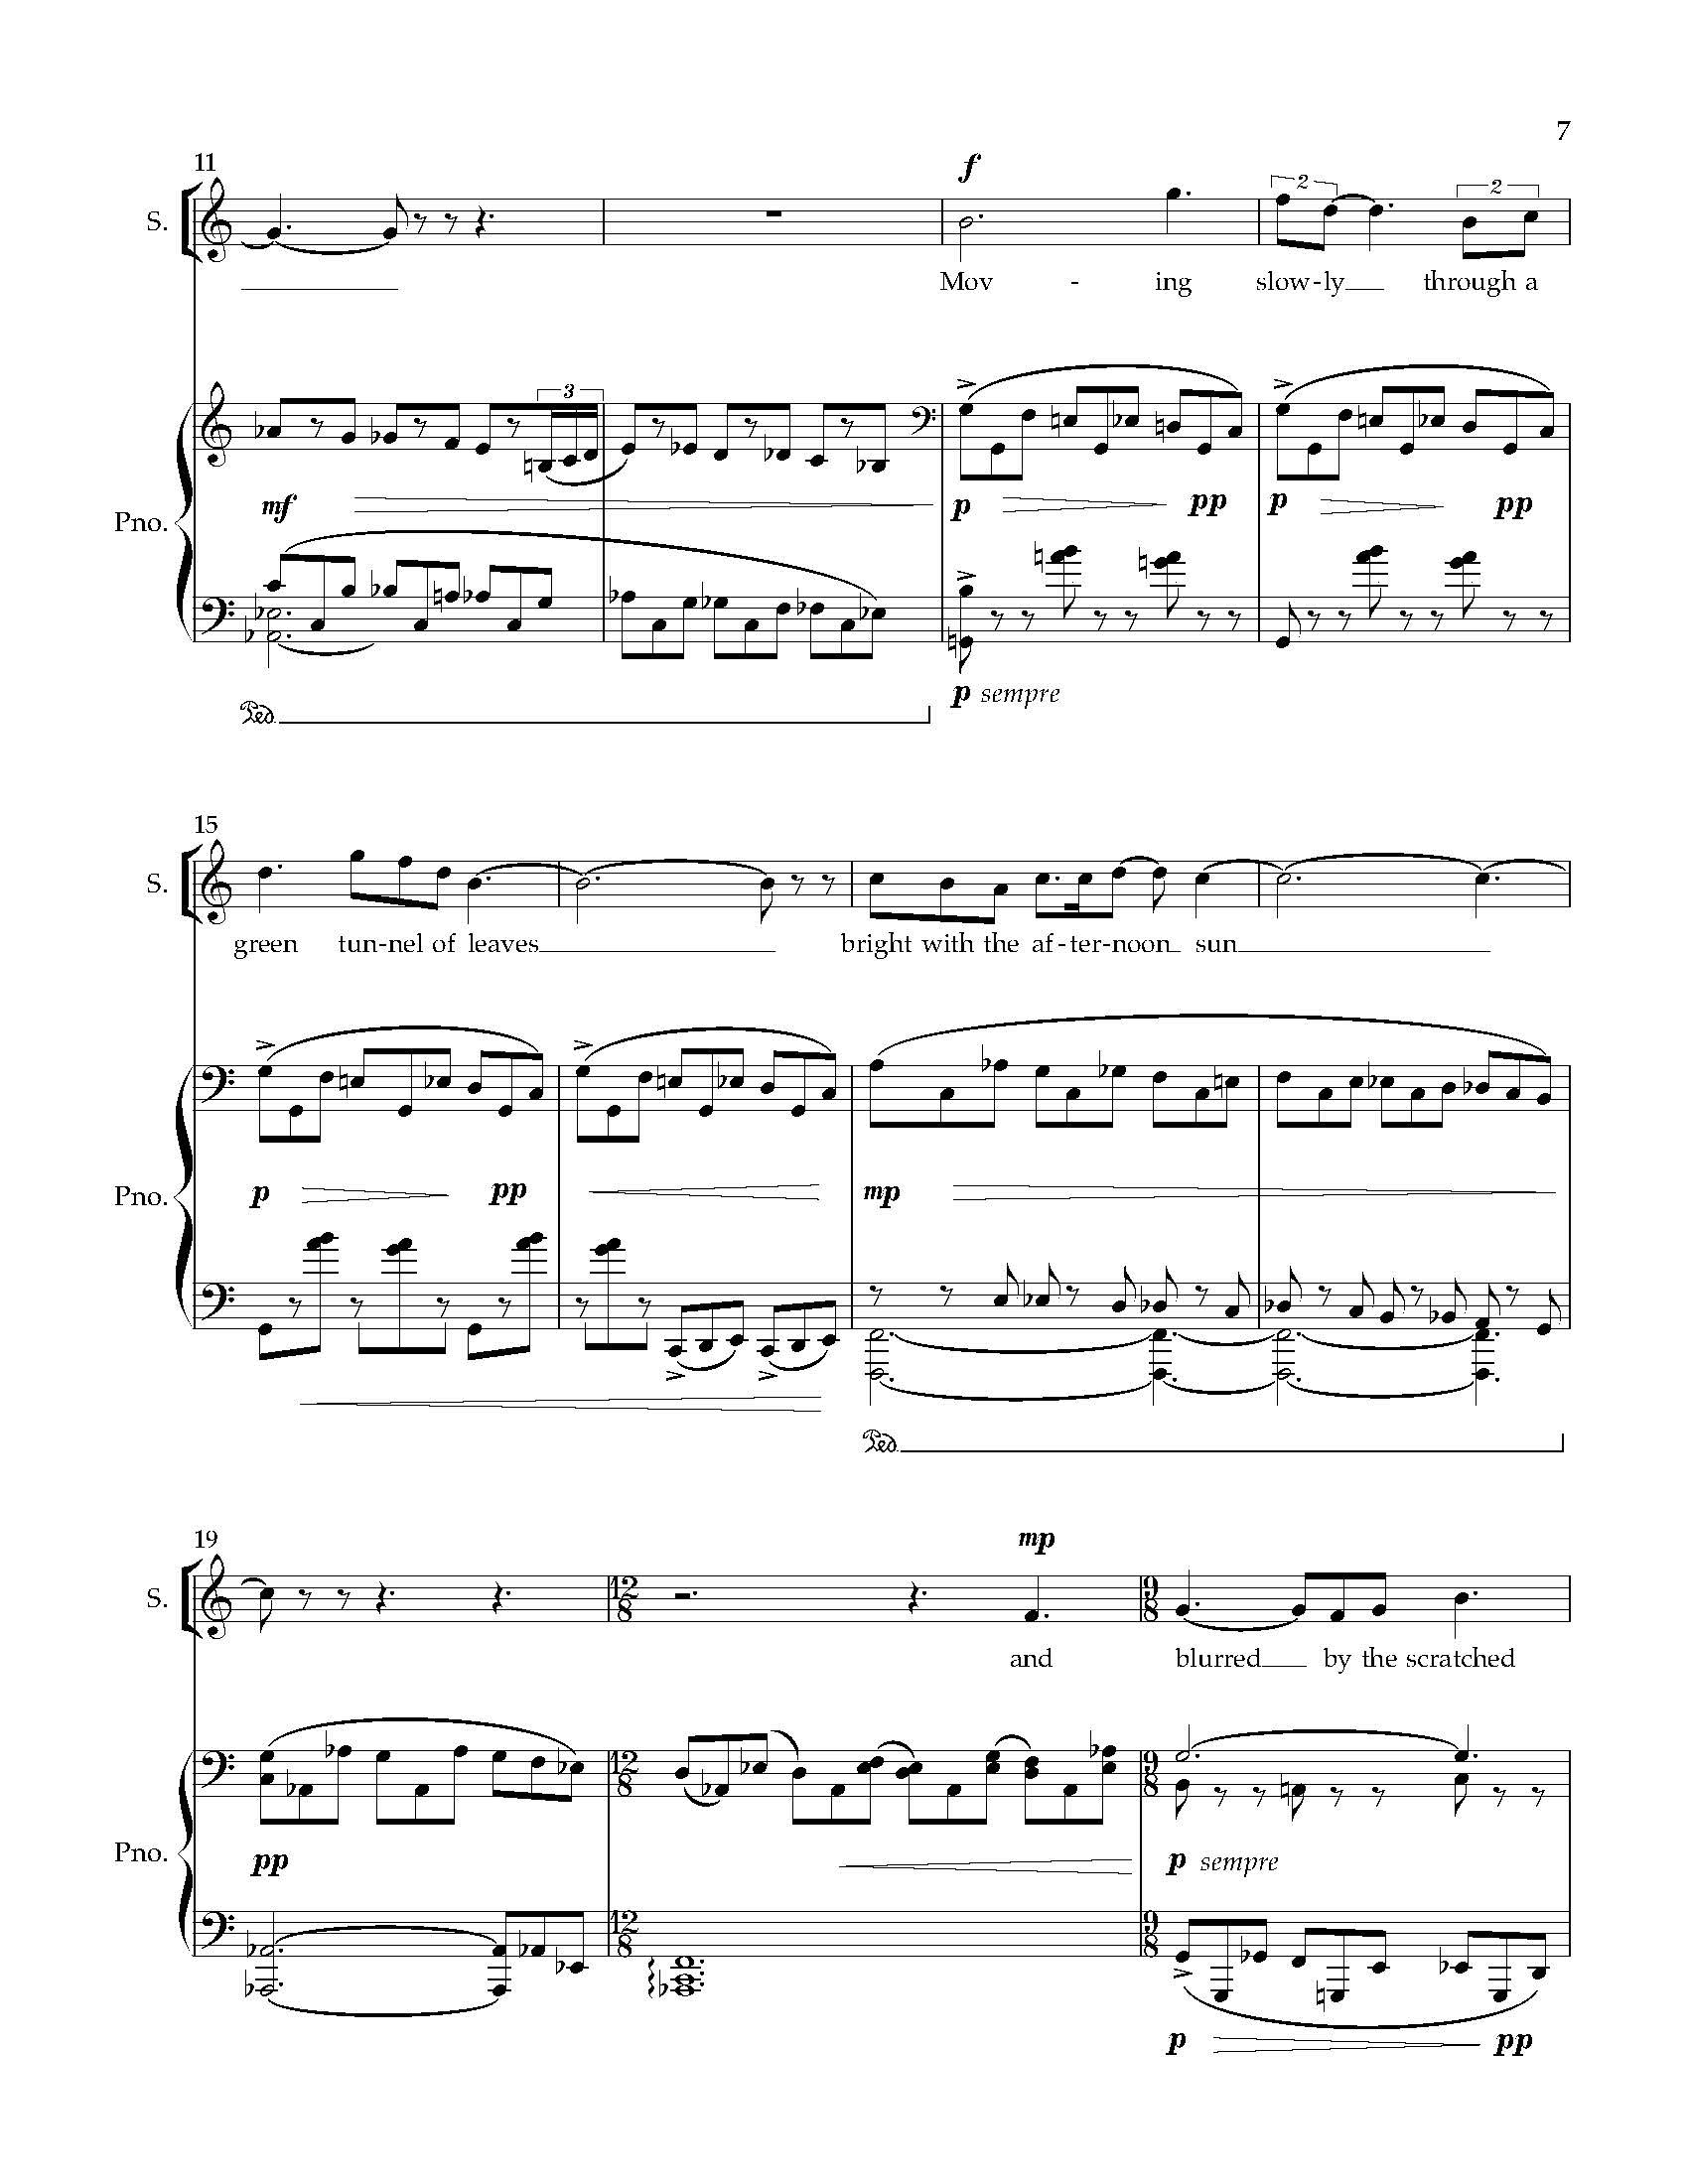 Sky - Complete Score (Revised)_Page_13.jpg